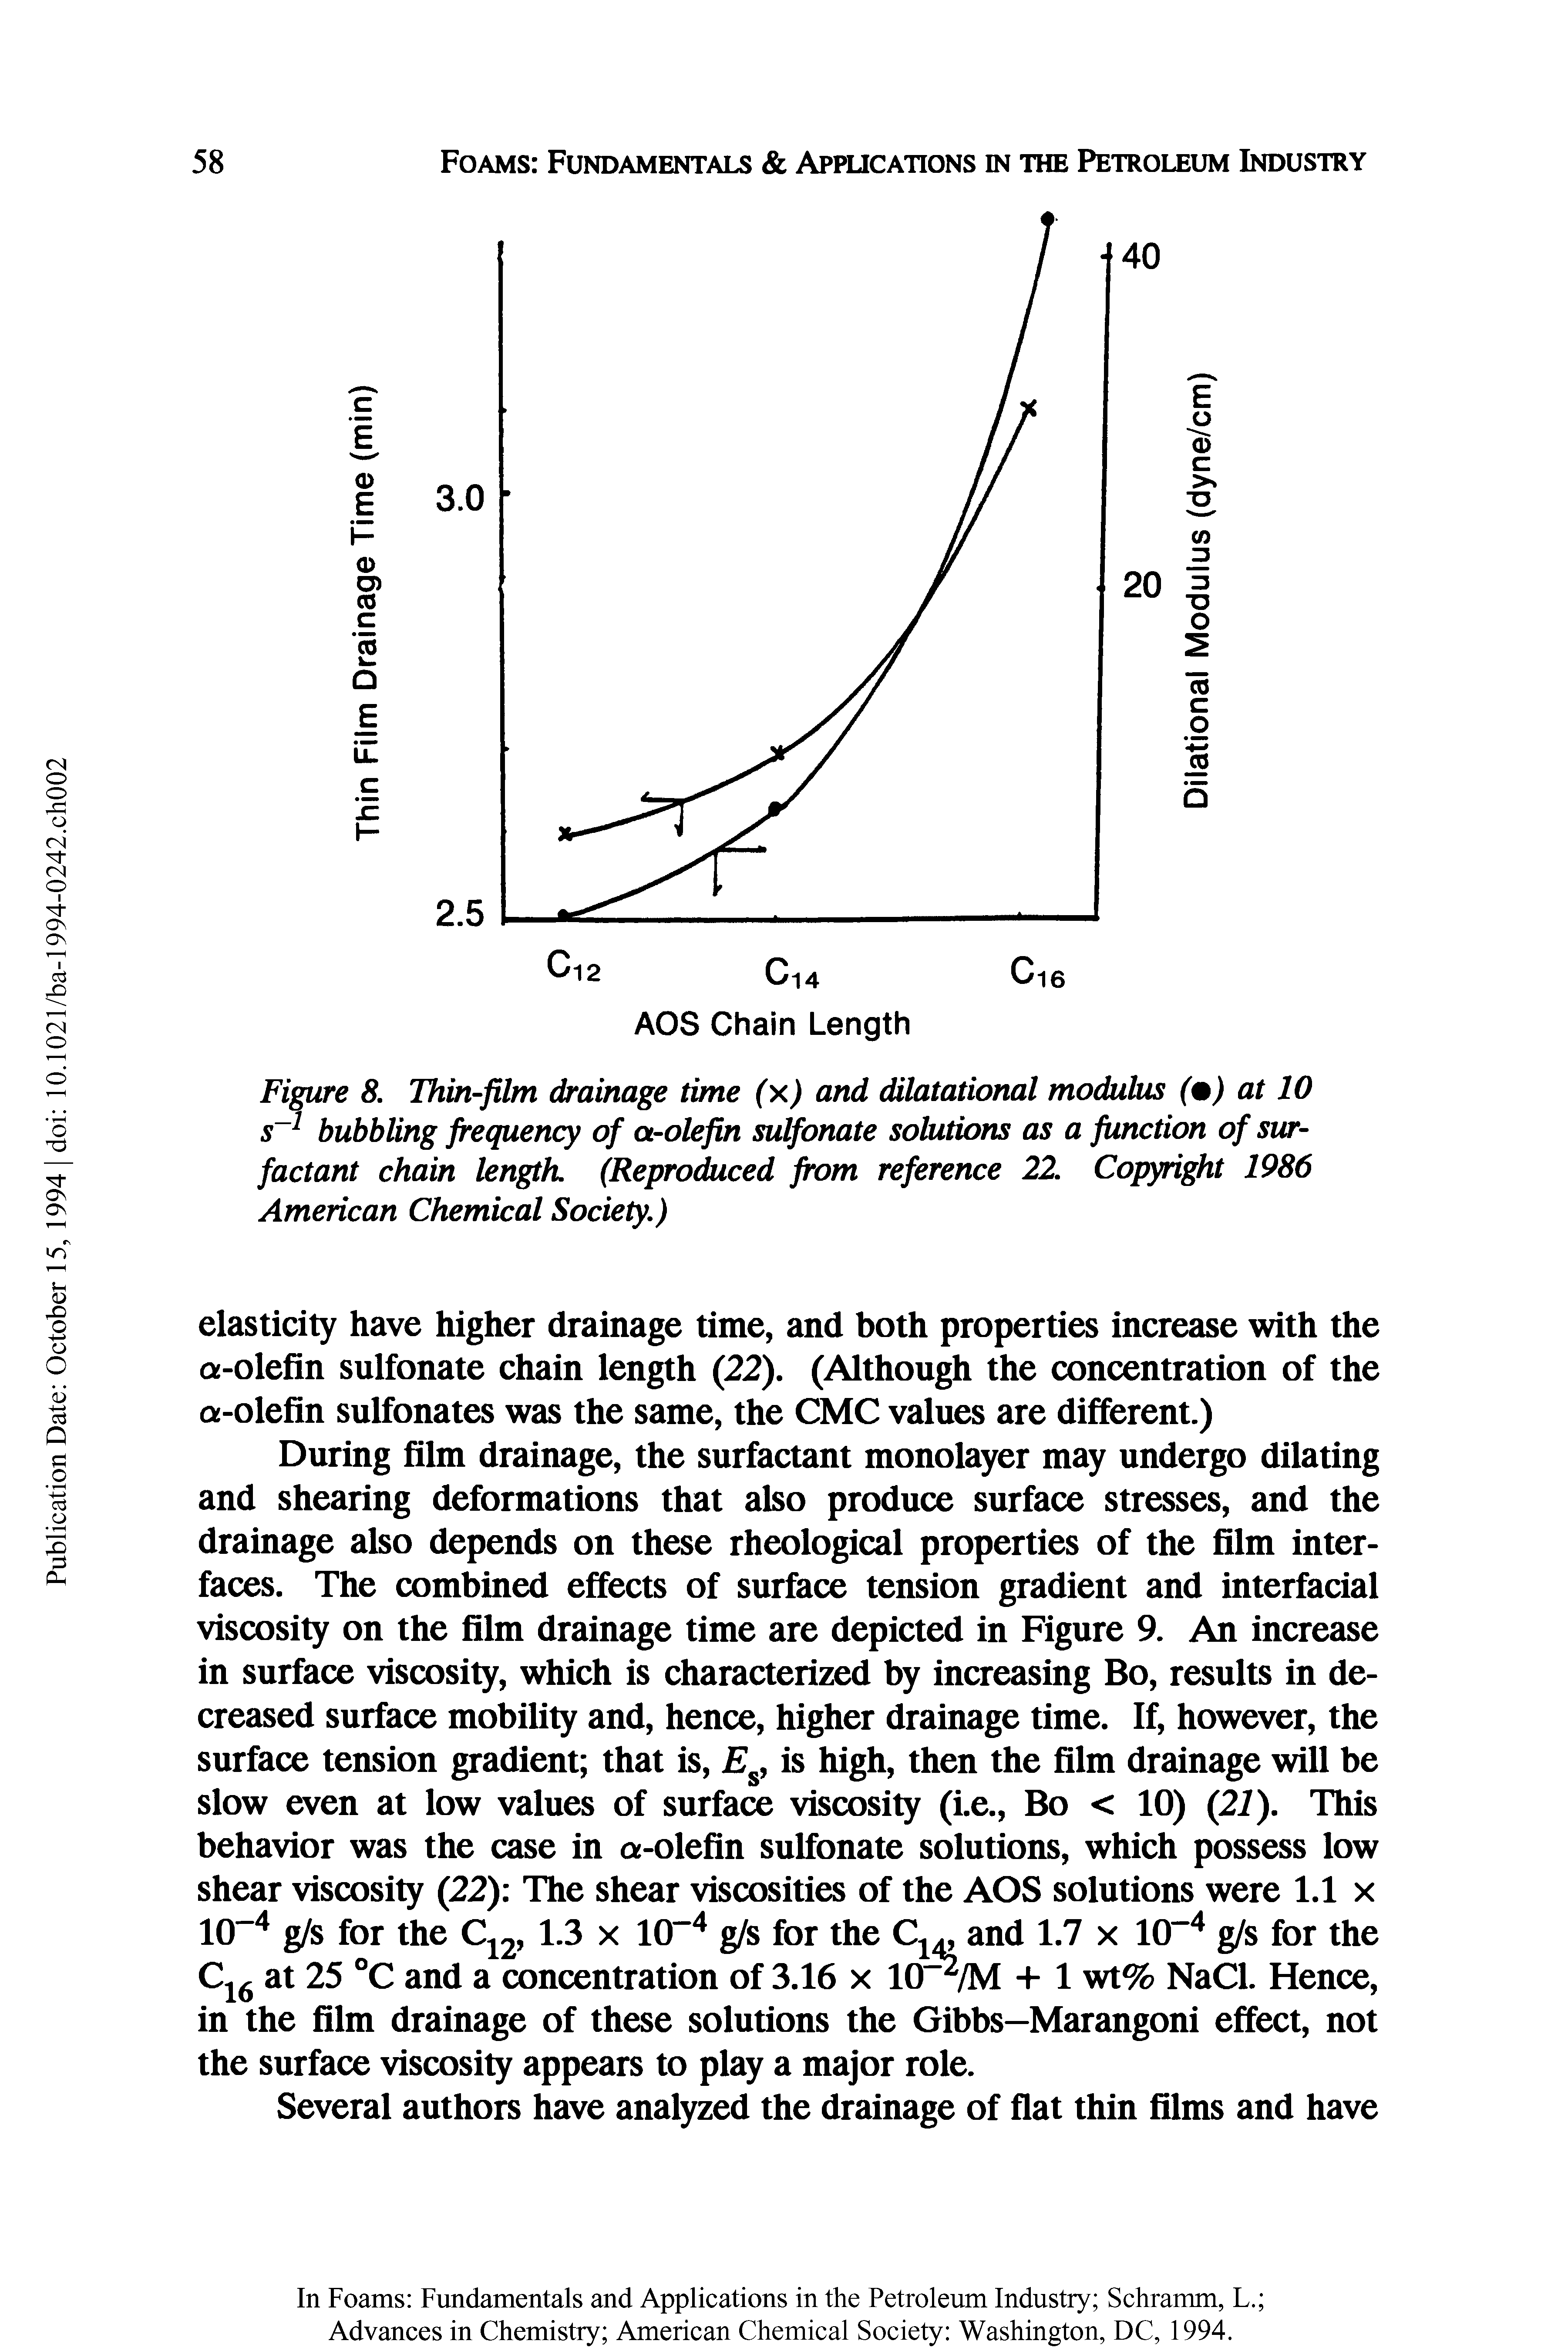 Figure 8. Thin-film drainage tune (x) and dilatational modulus (m) at 10 s 1 bubbling frequency of a-olefin sulfonate solutions as a function of surfactant chain length. (Reproduced from reference 22. Copyright 1986 American Chemical Society.)...